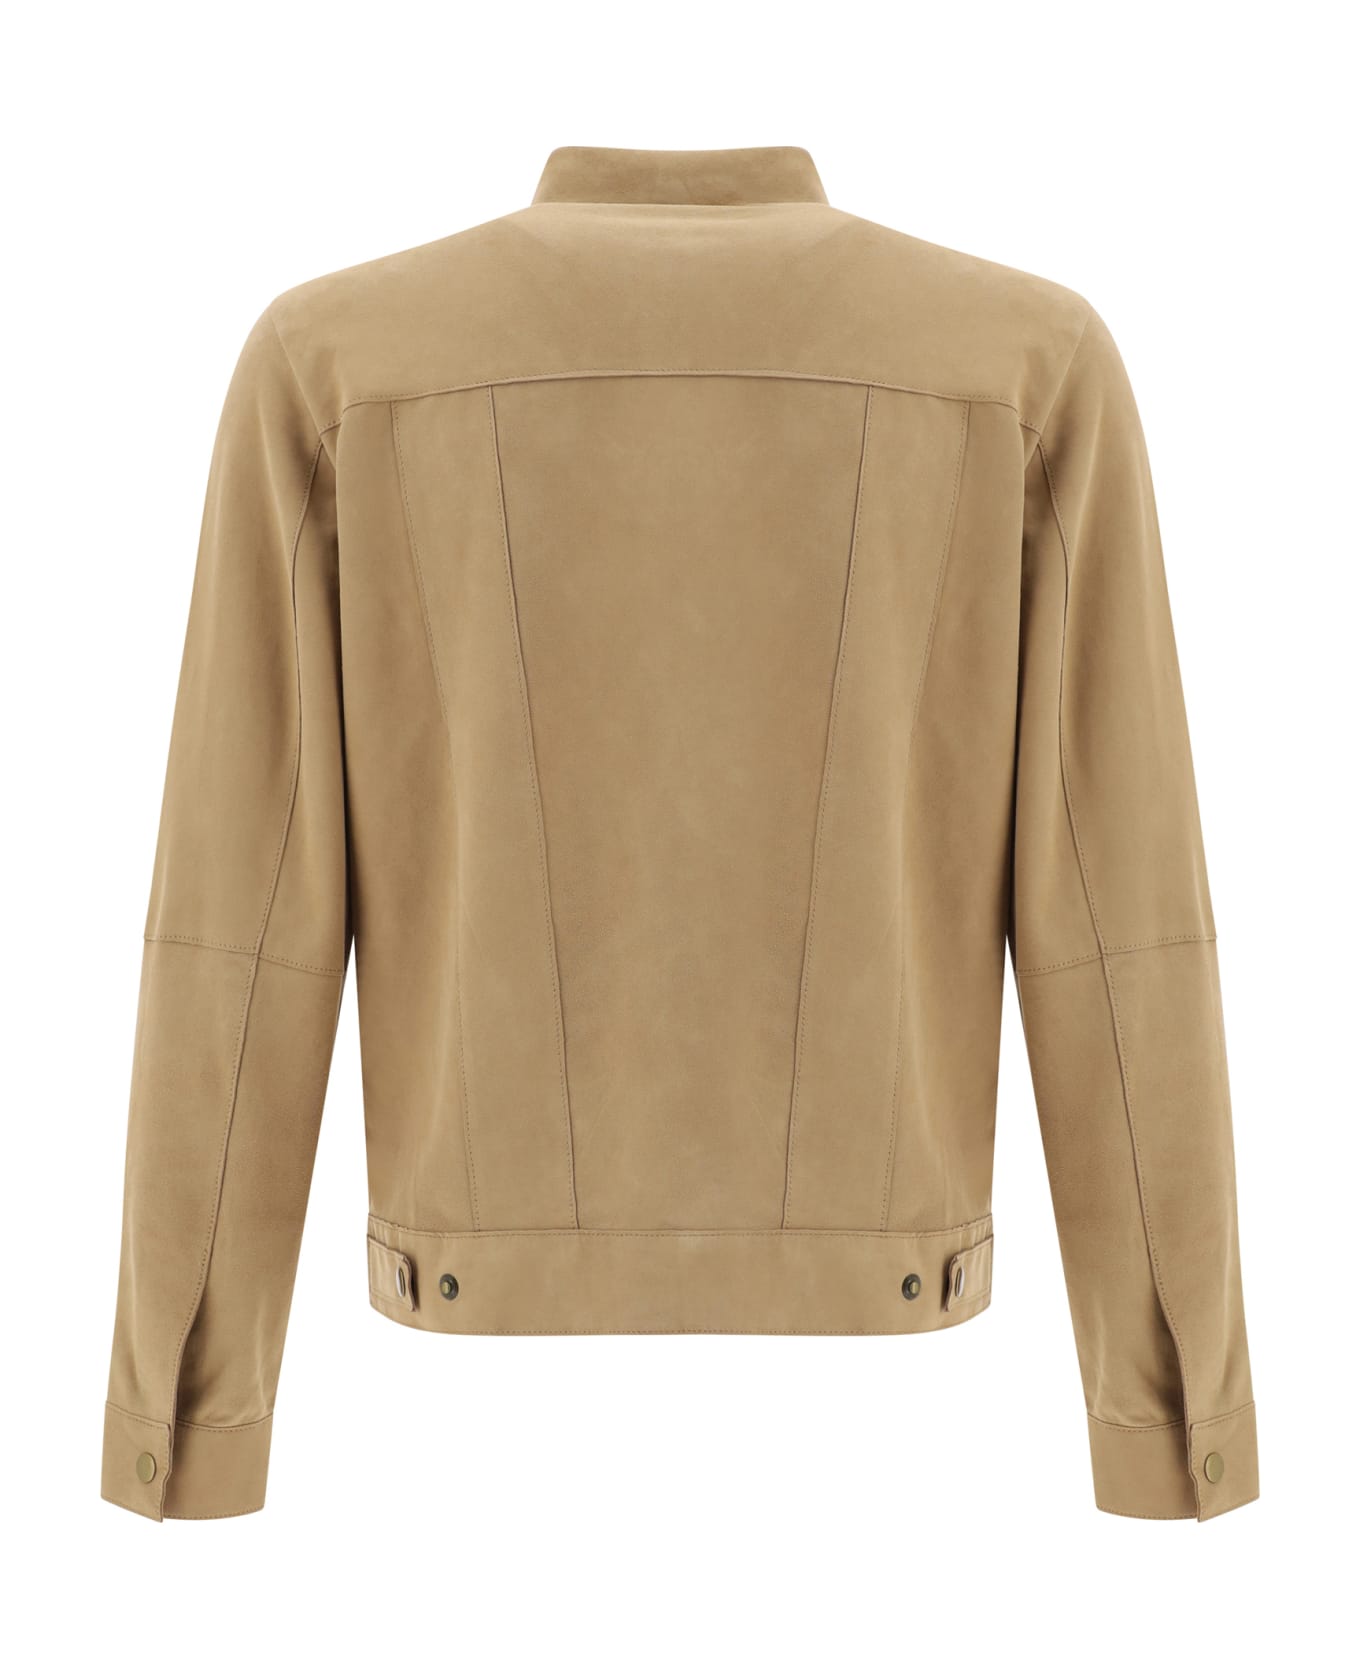 D'Amico Leather Jacket - Suede Beach Beige ジャケット